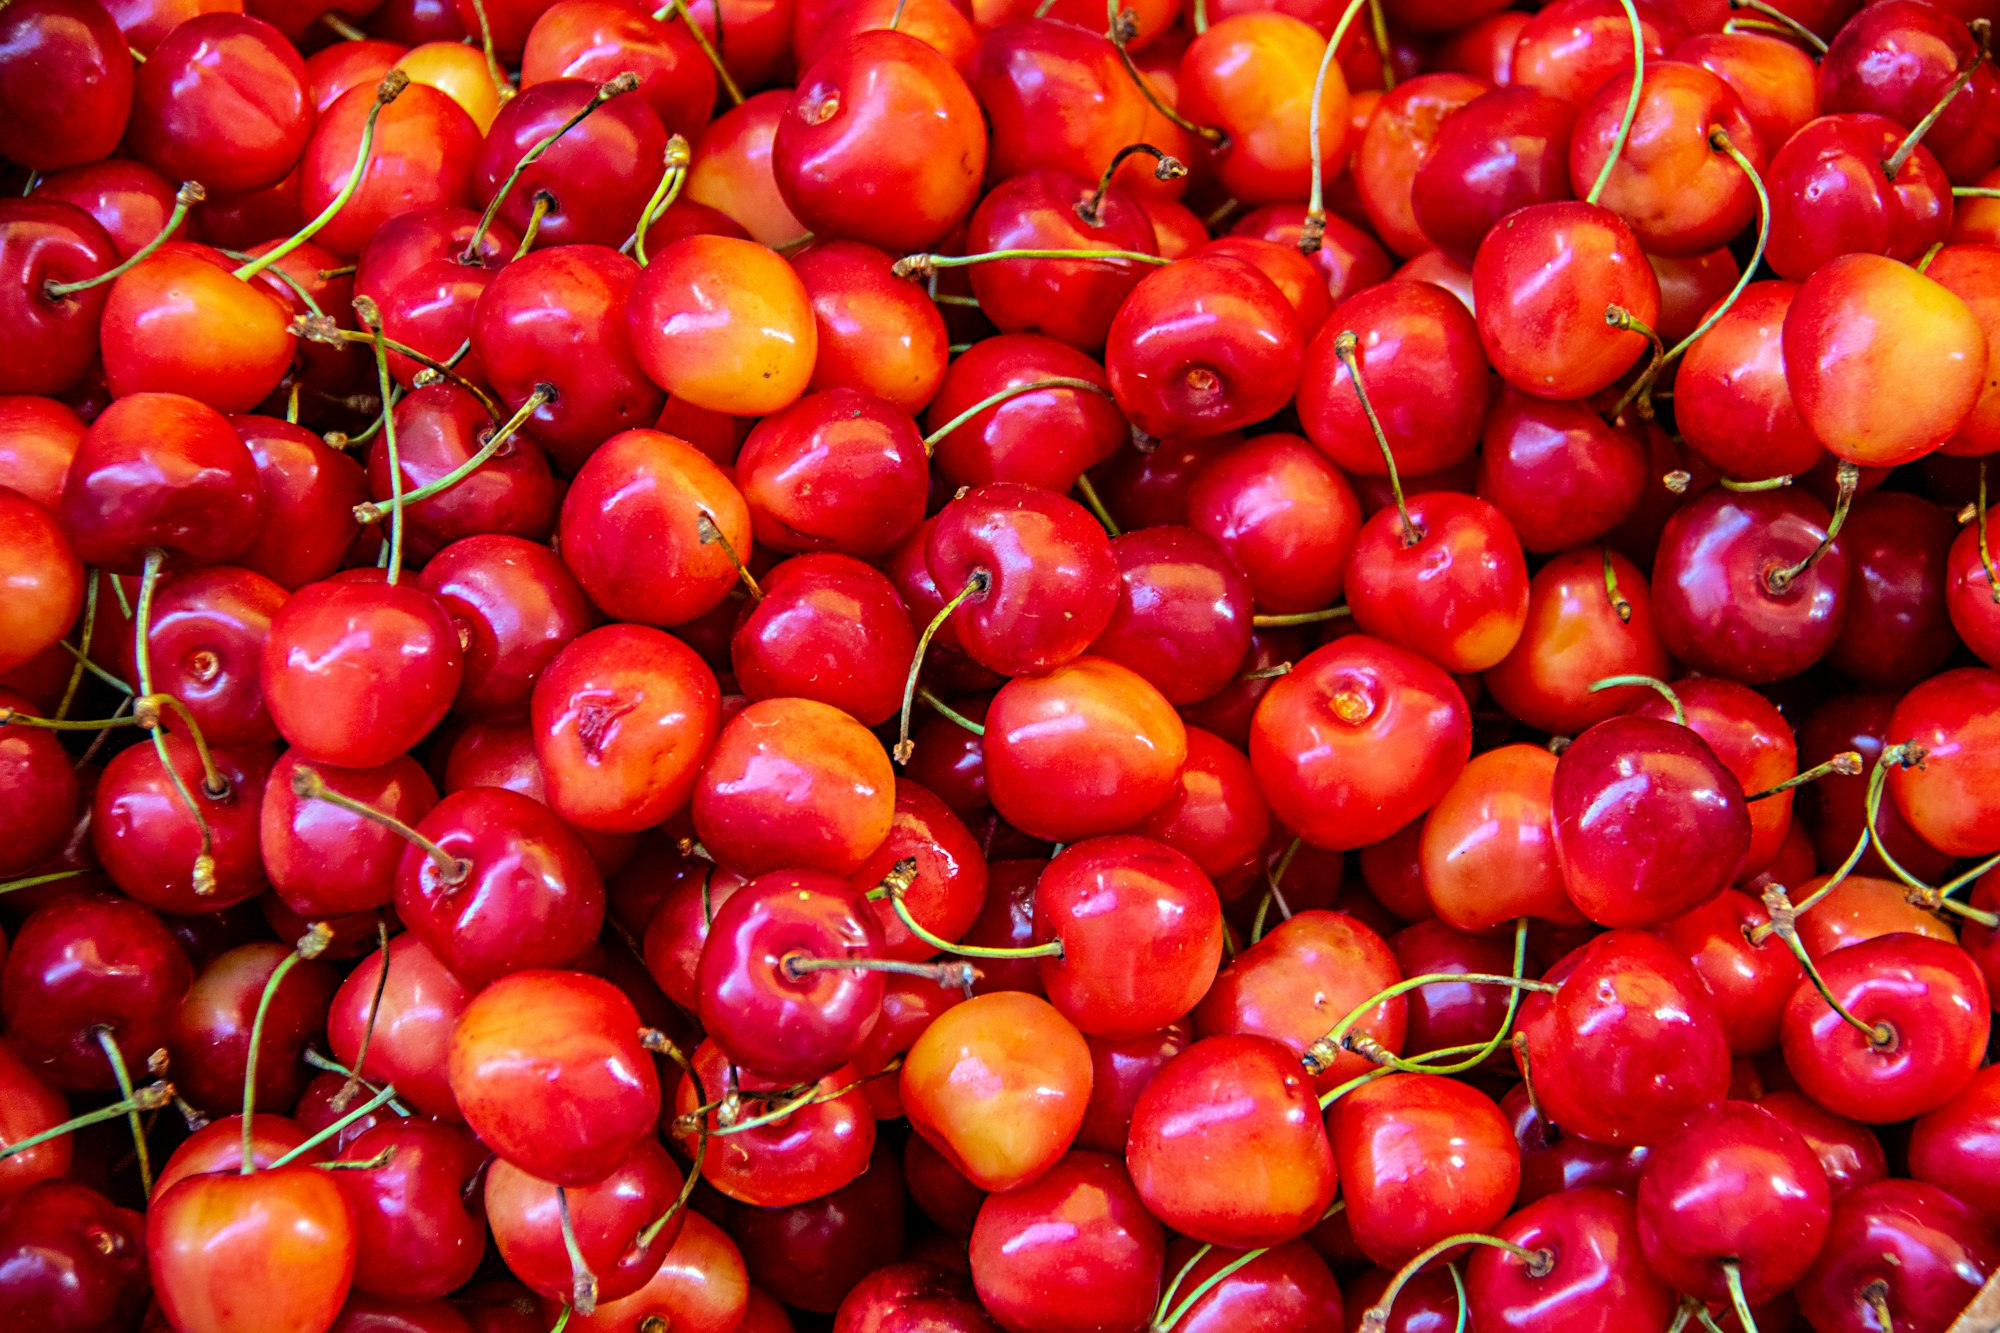 In Sorrento, in June, the cherries are ripe and ready to pick and send to market.  Due to the high temperatures and humidity, they also have, what the locals call Cherry Storms, thunderstorms that are dramatic, heavy and clear the air within a couple of hours.